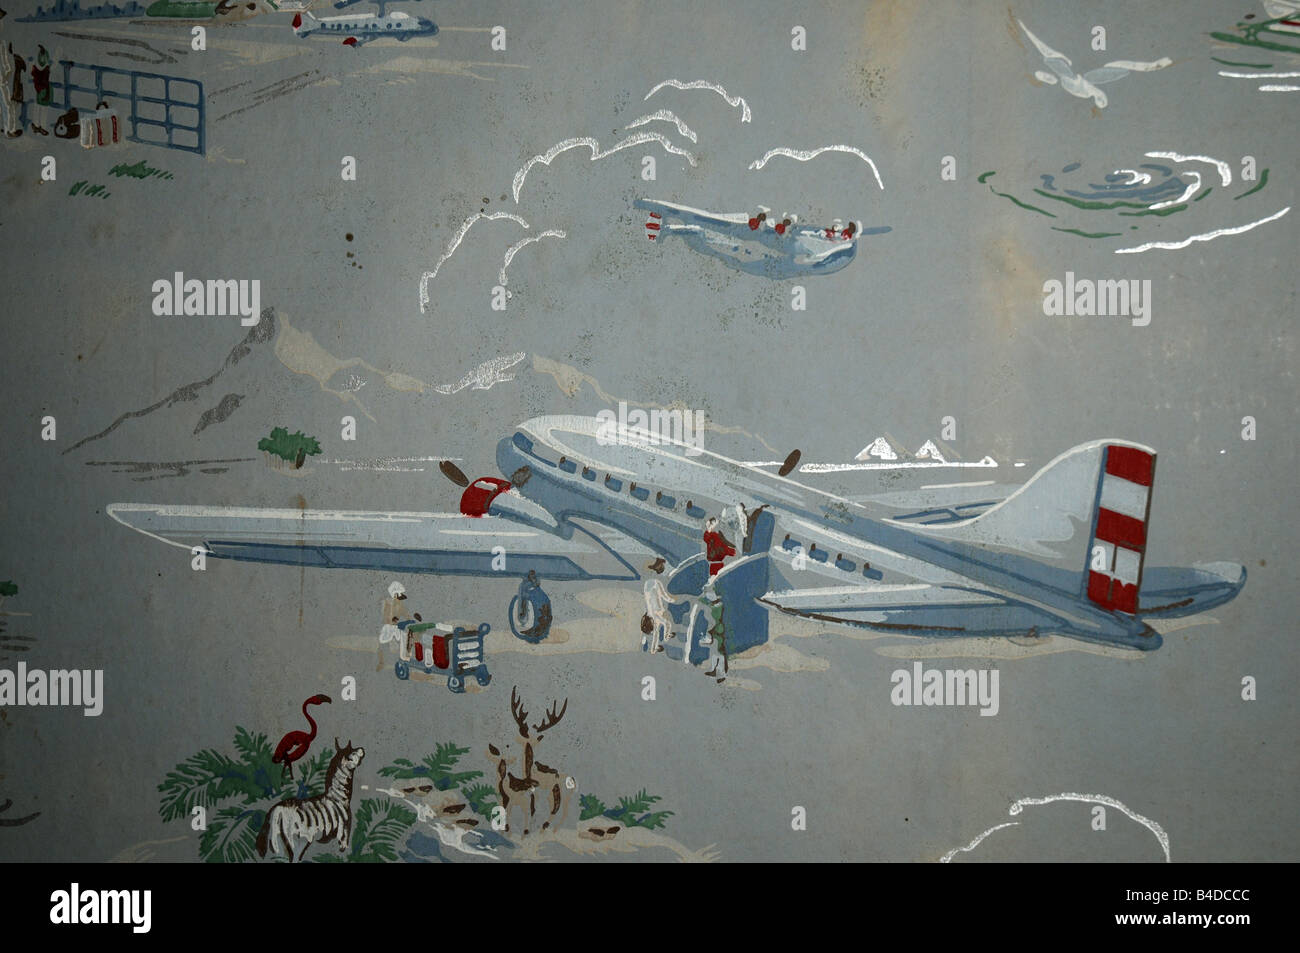 Old wallpaper from the 1940 s with DC-3 airline airplane Stock Photo